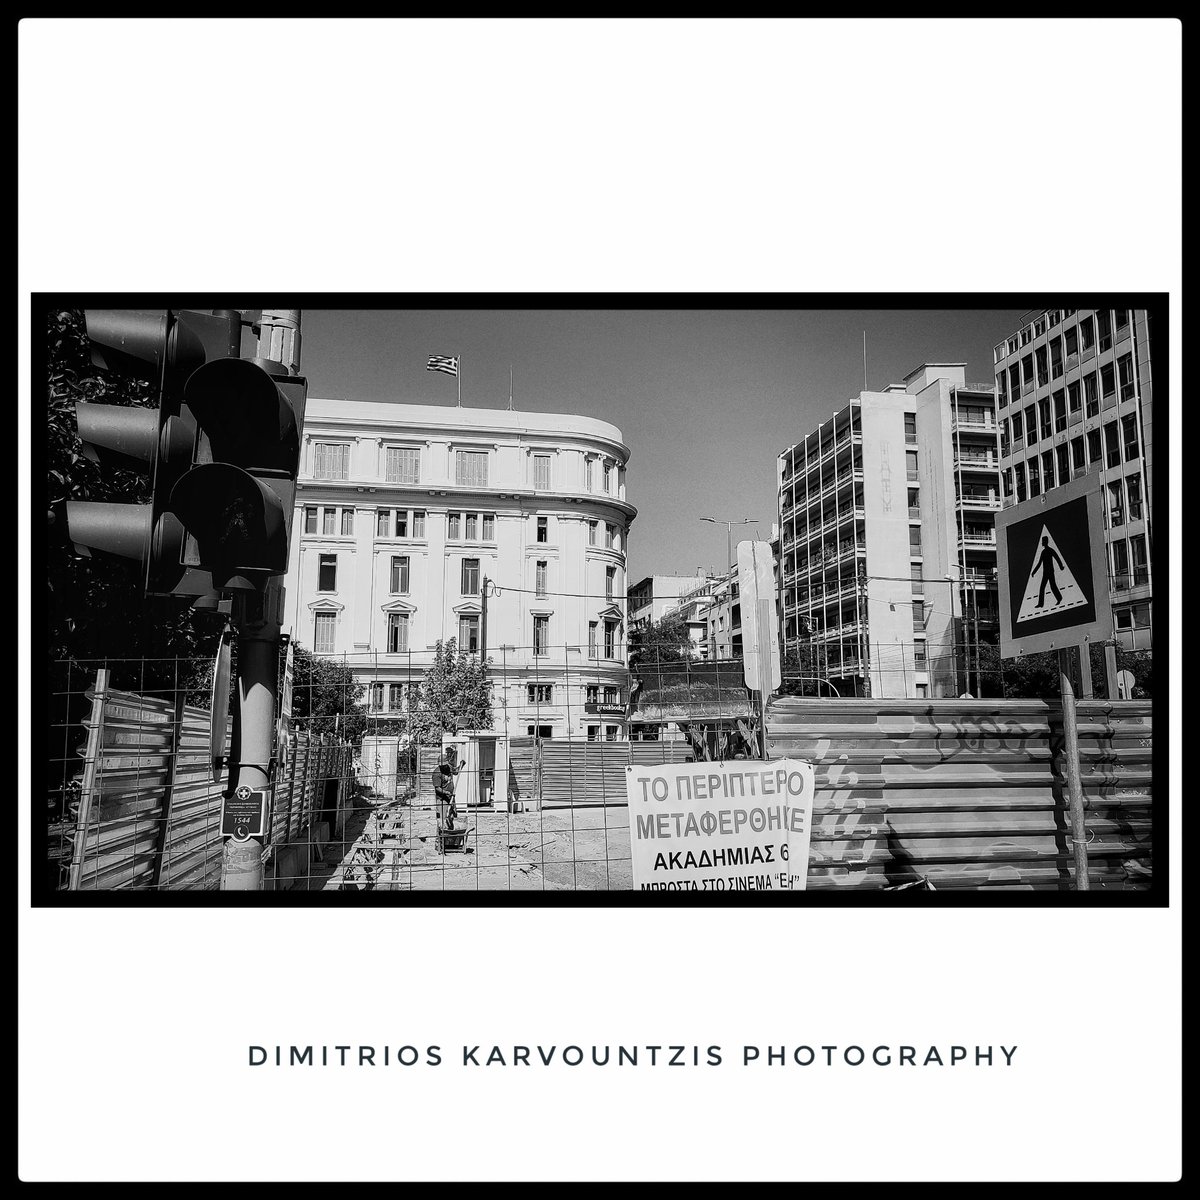 'The kiosk was moved'

#streetphotographers #streetphotography #bwphotography #blackandwhite #pressphotography #pressphotographer #construction #metro #citycenter #photojournalism #photojournalist #athens #allrightsreserved©️